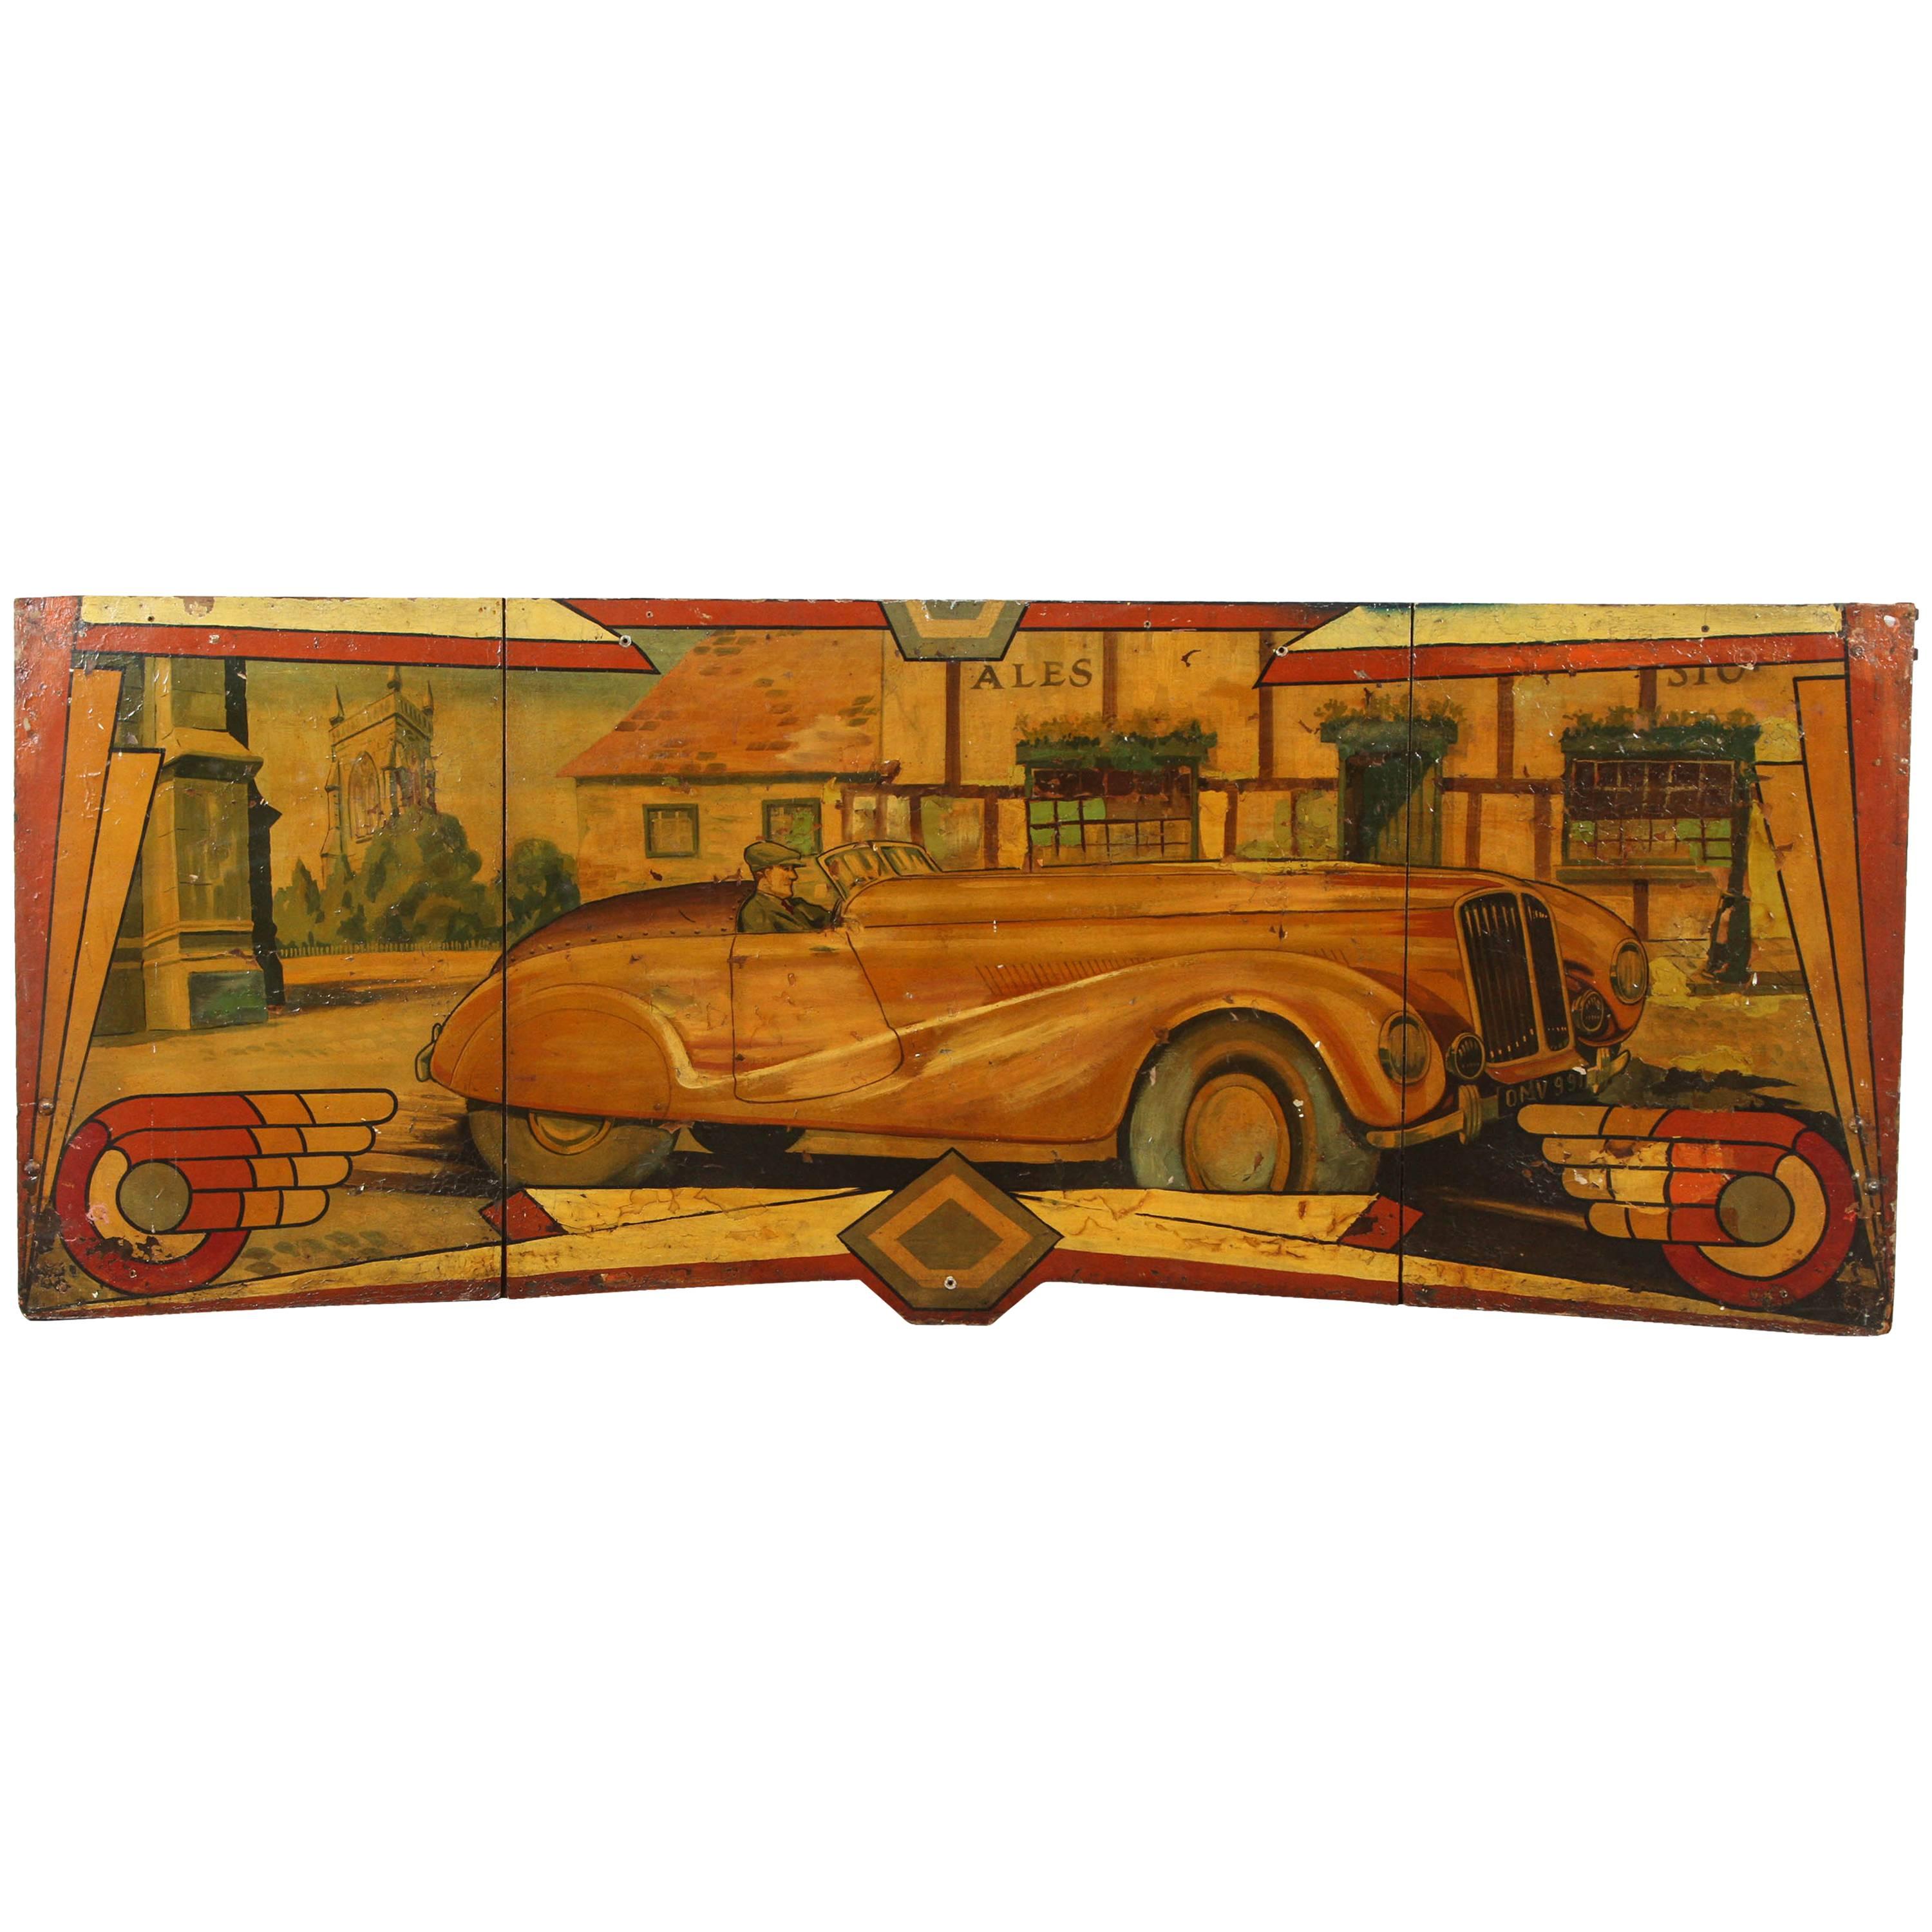 Early Carnival Automobile Ride Original Hand-Painted Rounding Board